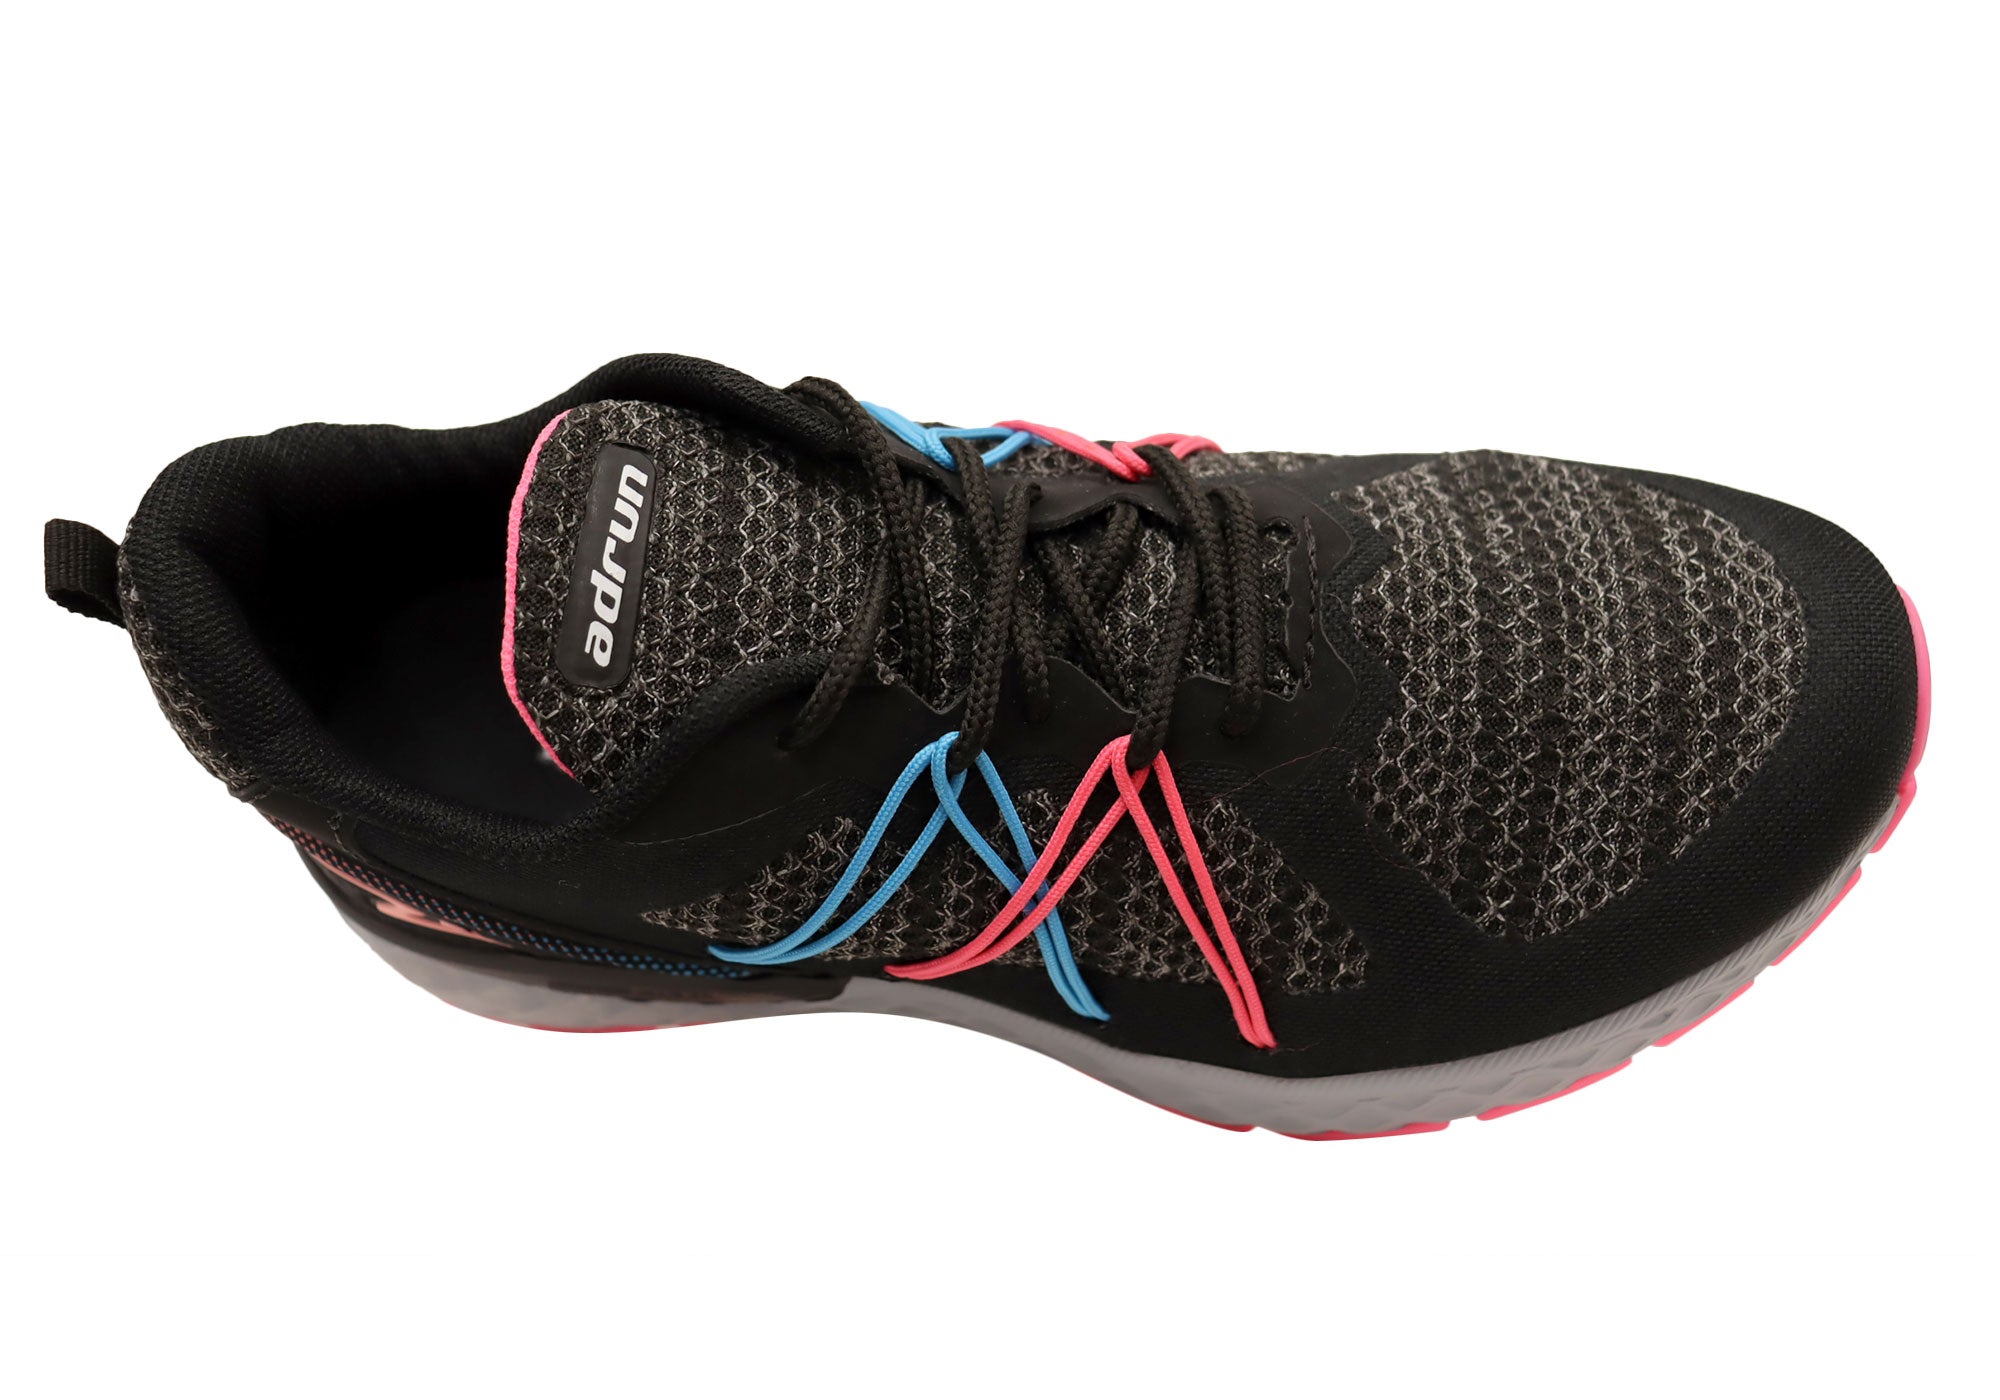 Adrun Motion Womens Comfortable Athletic Shoes Made In Brazil